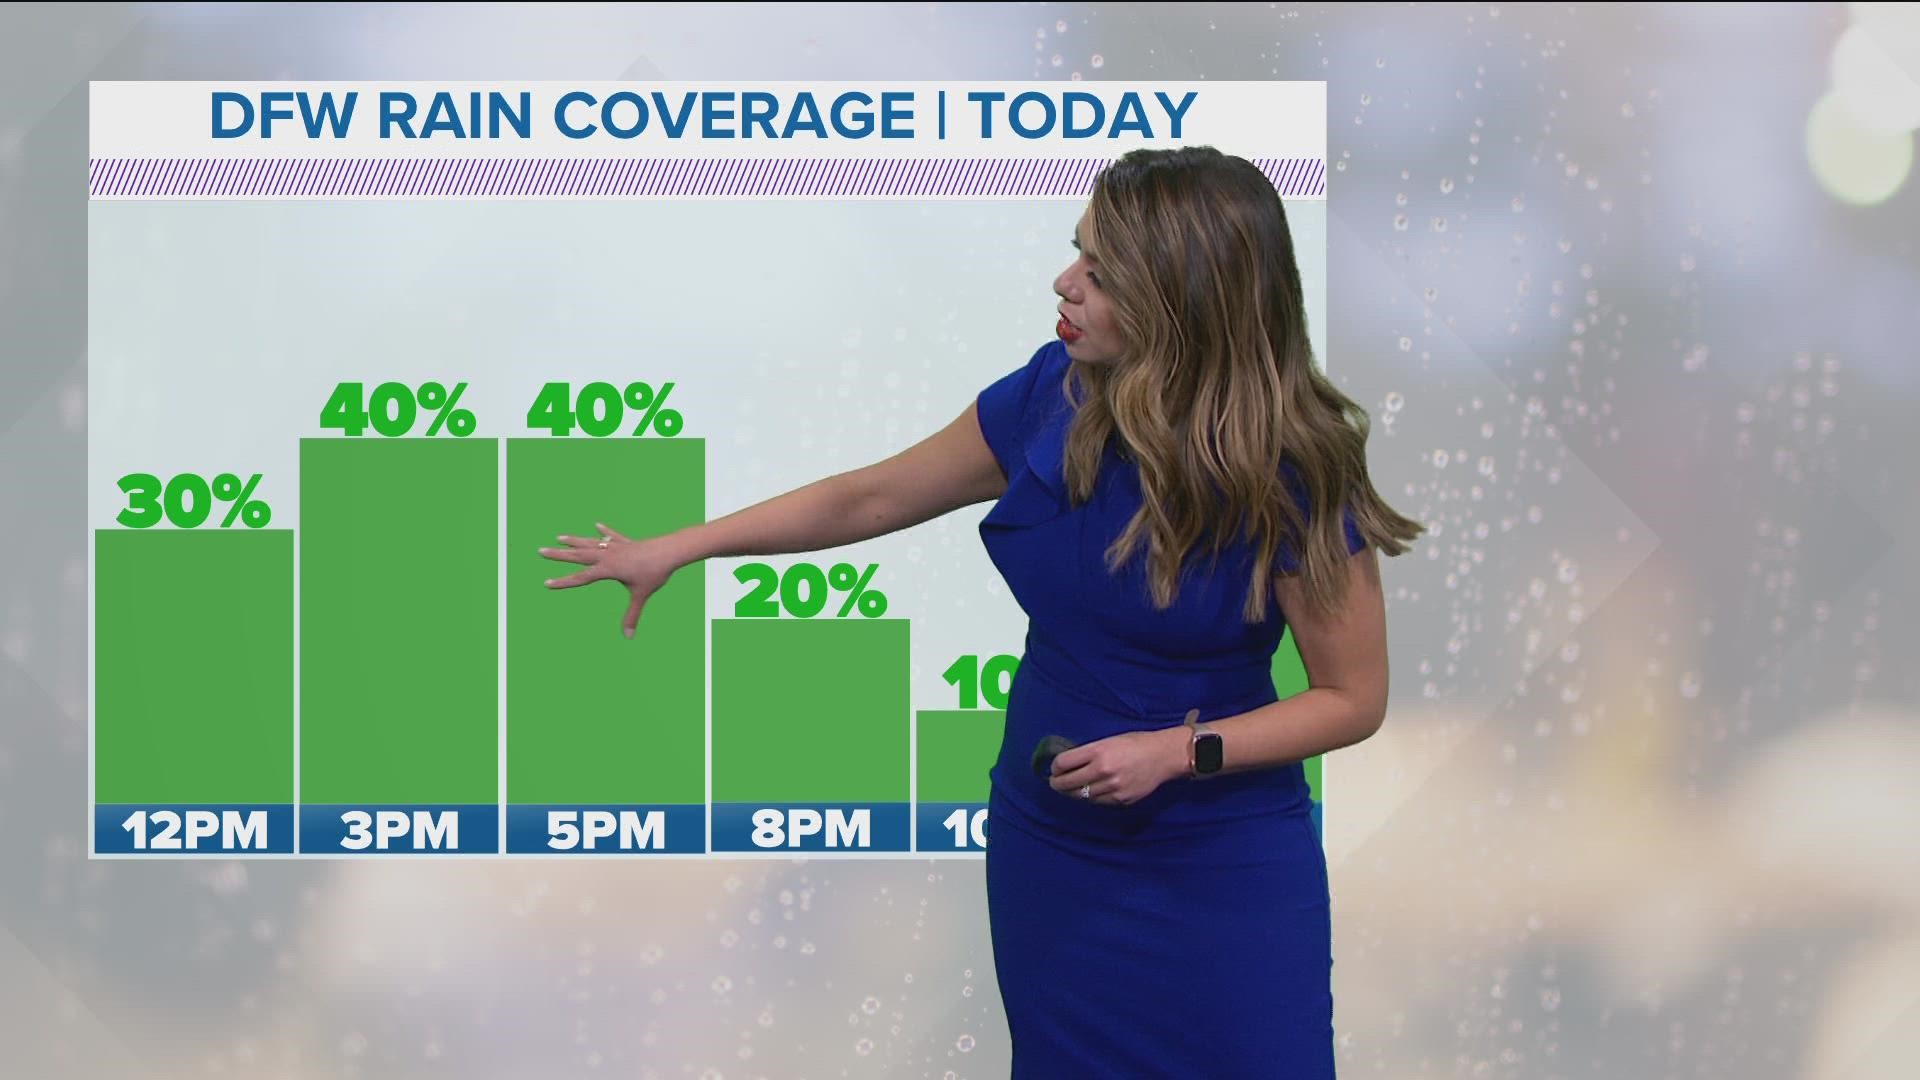 WFAA meteorologist Mariel Ruiz says the rain will slowly settle down as the day continues.